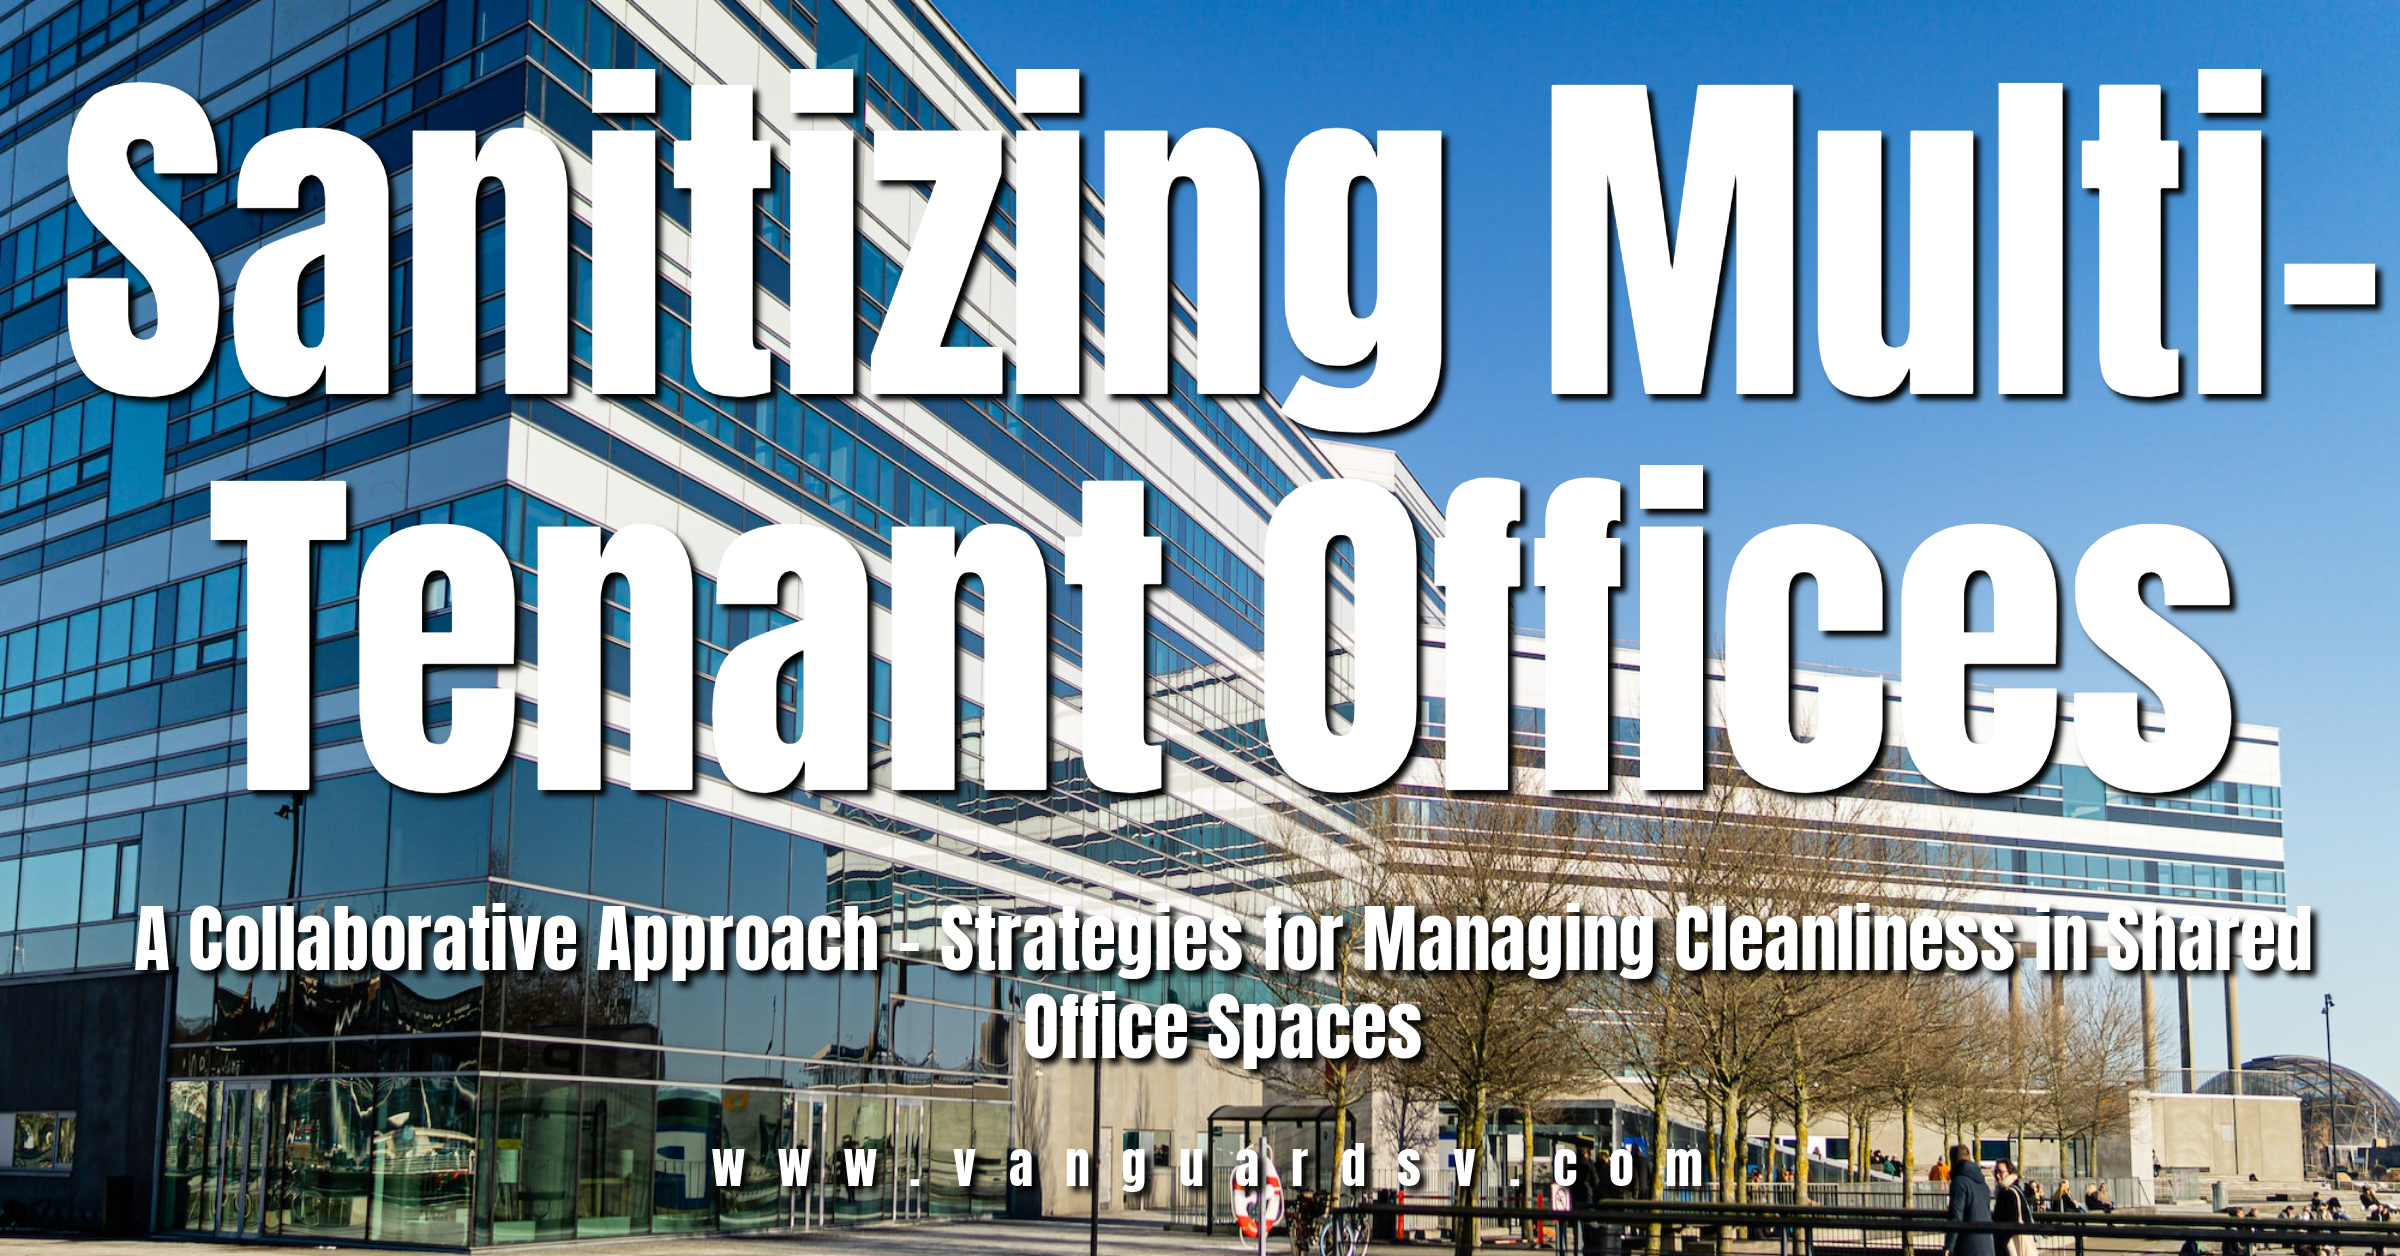 Sanitizing-Multi-Tenant-Offices-A-Collaborative-Approach-Strategies-for-Managing-Cleanliness-in-Shared-Office-Spaces